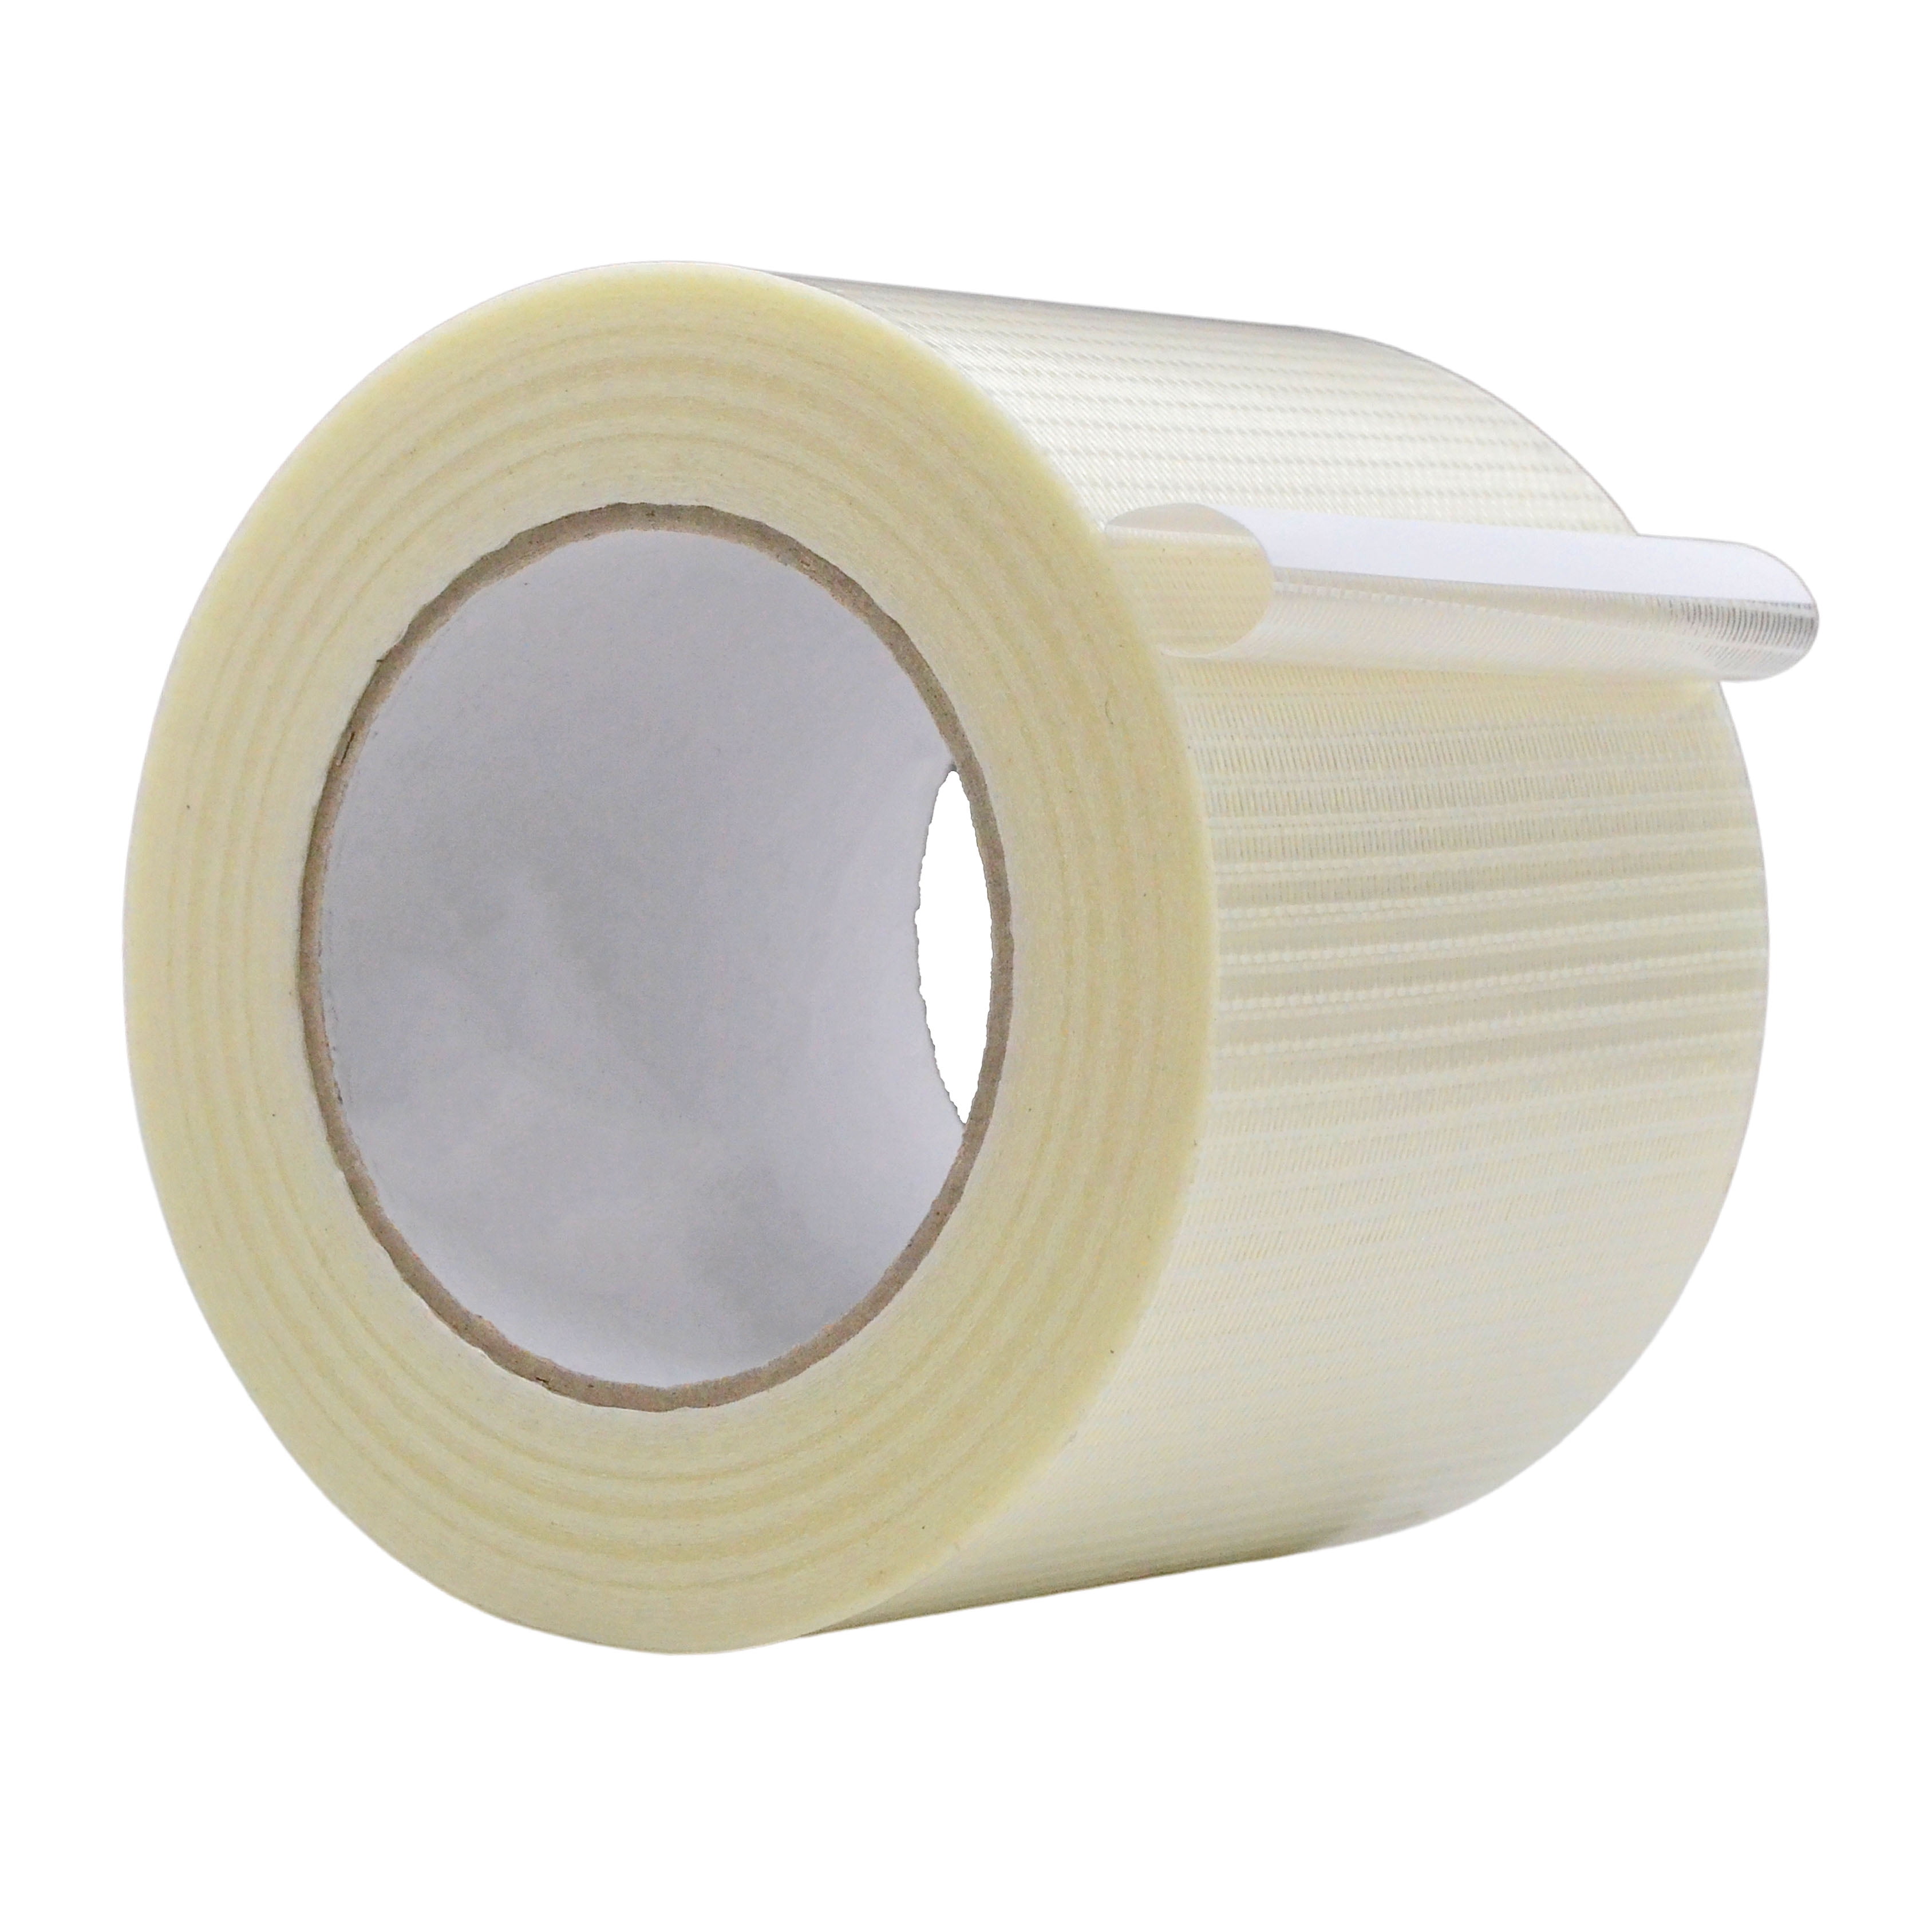 Unomor 2 Pairs Surface Strap Silicone Tape Bar Tape Wound Tape